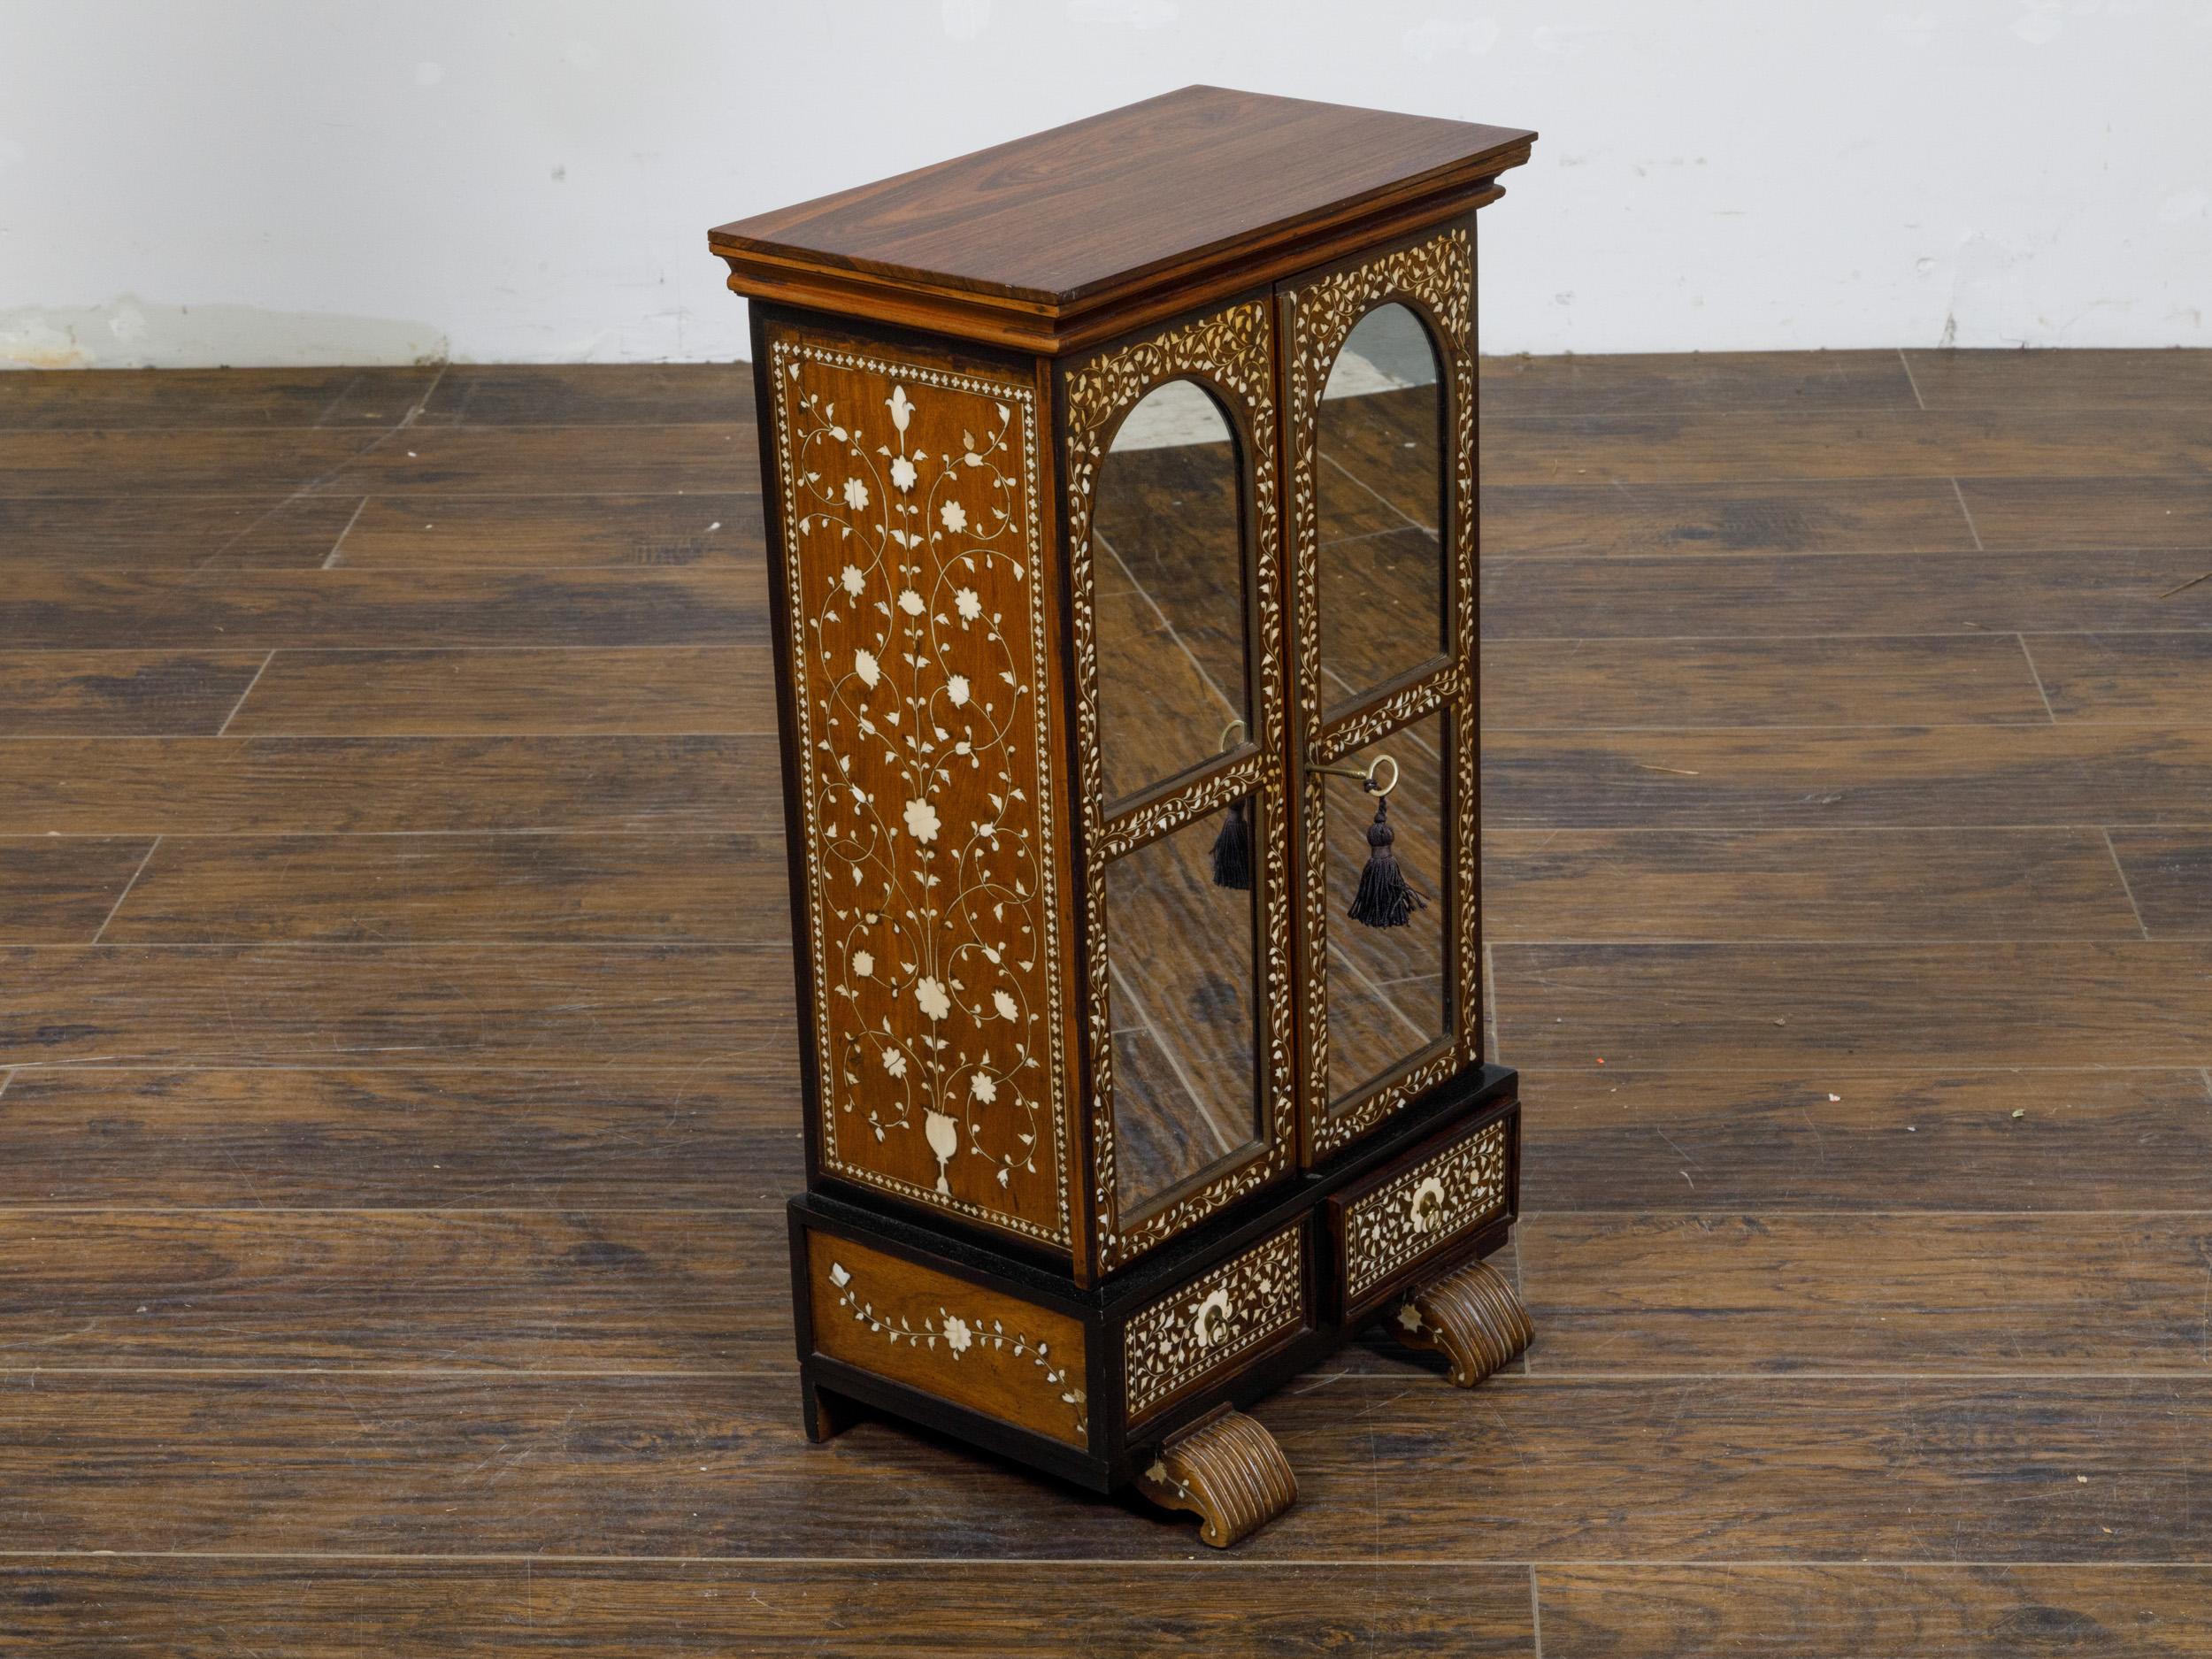 An English miniature cabinet from the 19th century with scrollwork inlay, glass doors and multiple inner drawers. This English miniature cabinet from the 19th century is an exquisite representation of Victorian craftsmanship. The cabinet features